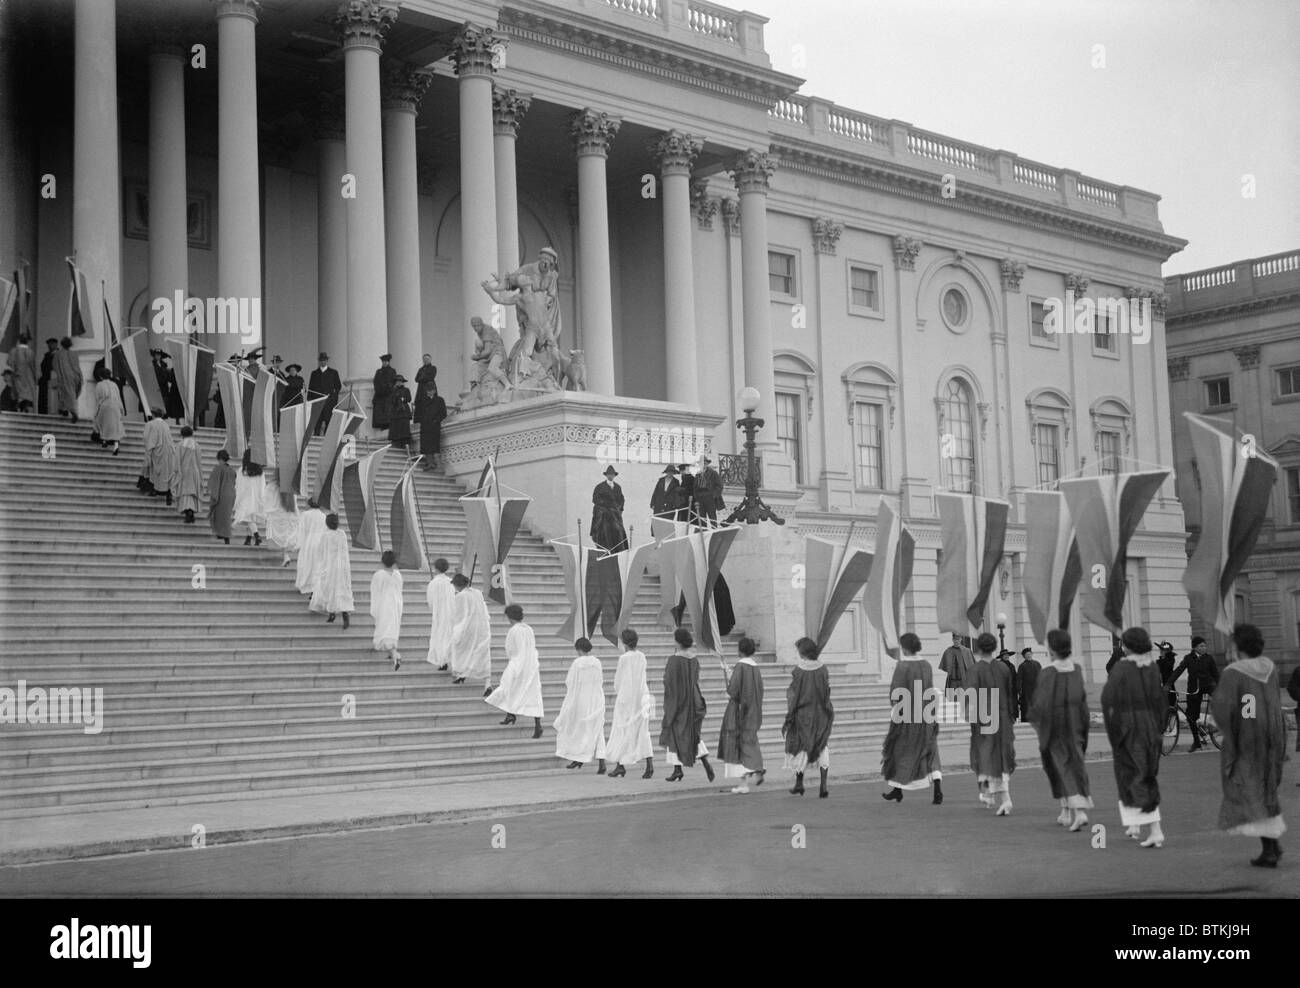 Woman Suffrage demonstration with banners at the U.S. Capitol in 1917. View of Procession ascending Capitol steps. Stock Photo